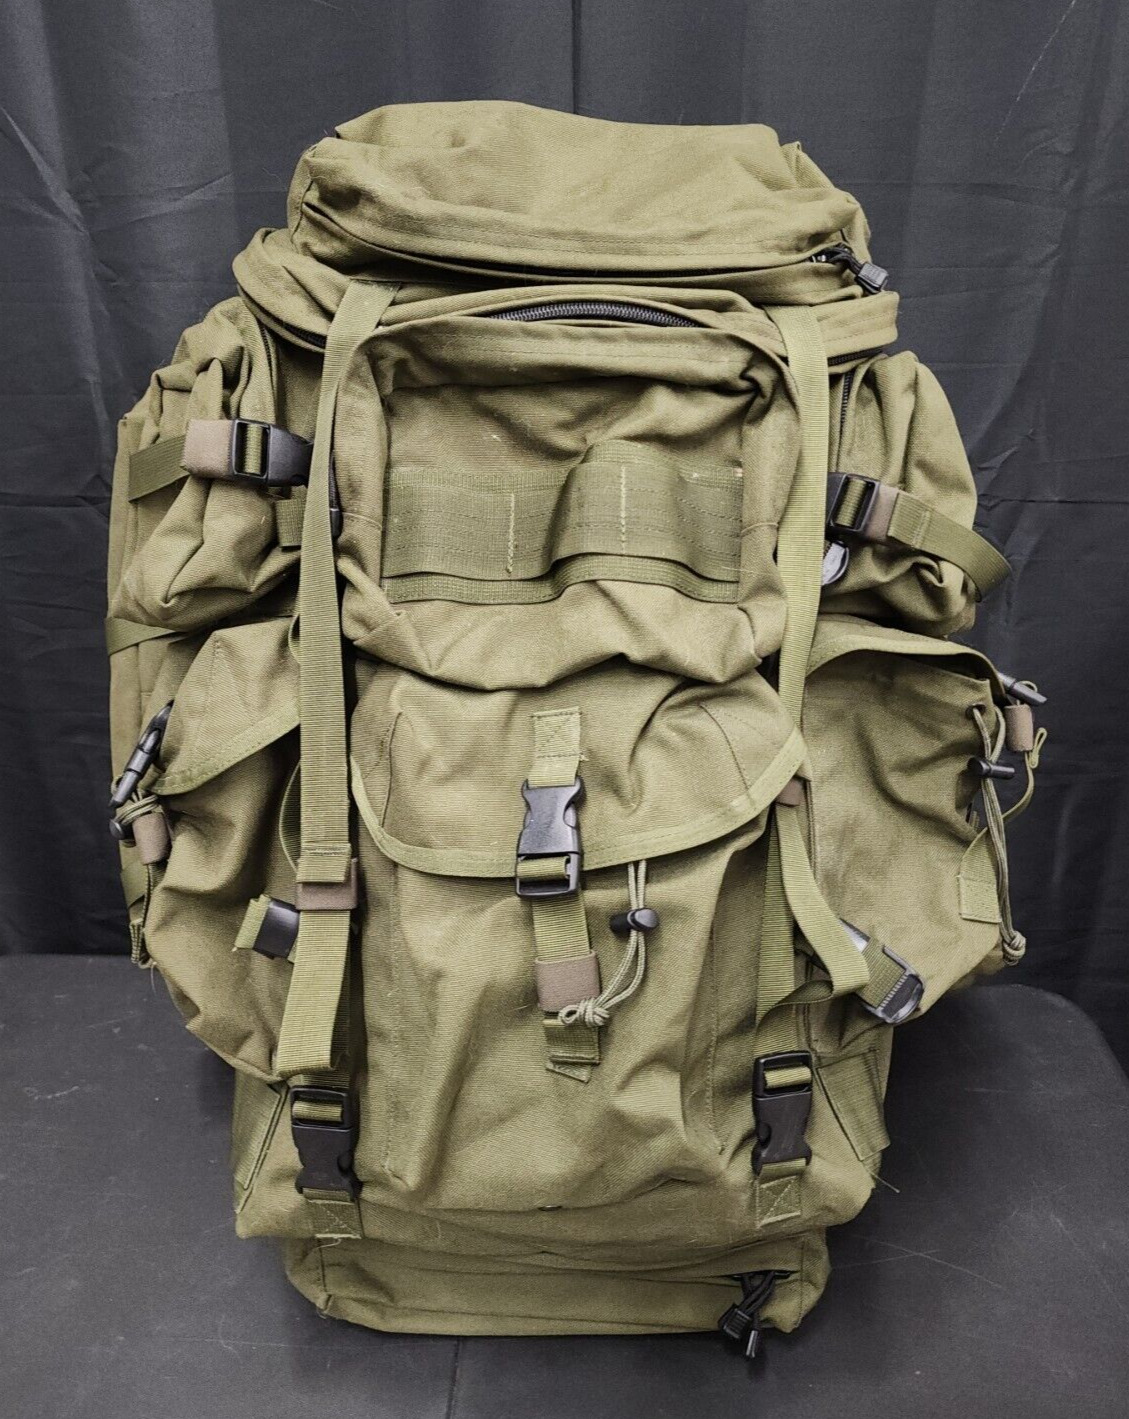 Blackhawk Tactical SOF Large Ruck ALICE Pack w/Frame Straps Army Green Cag Sof